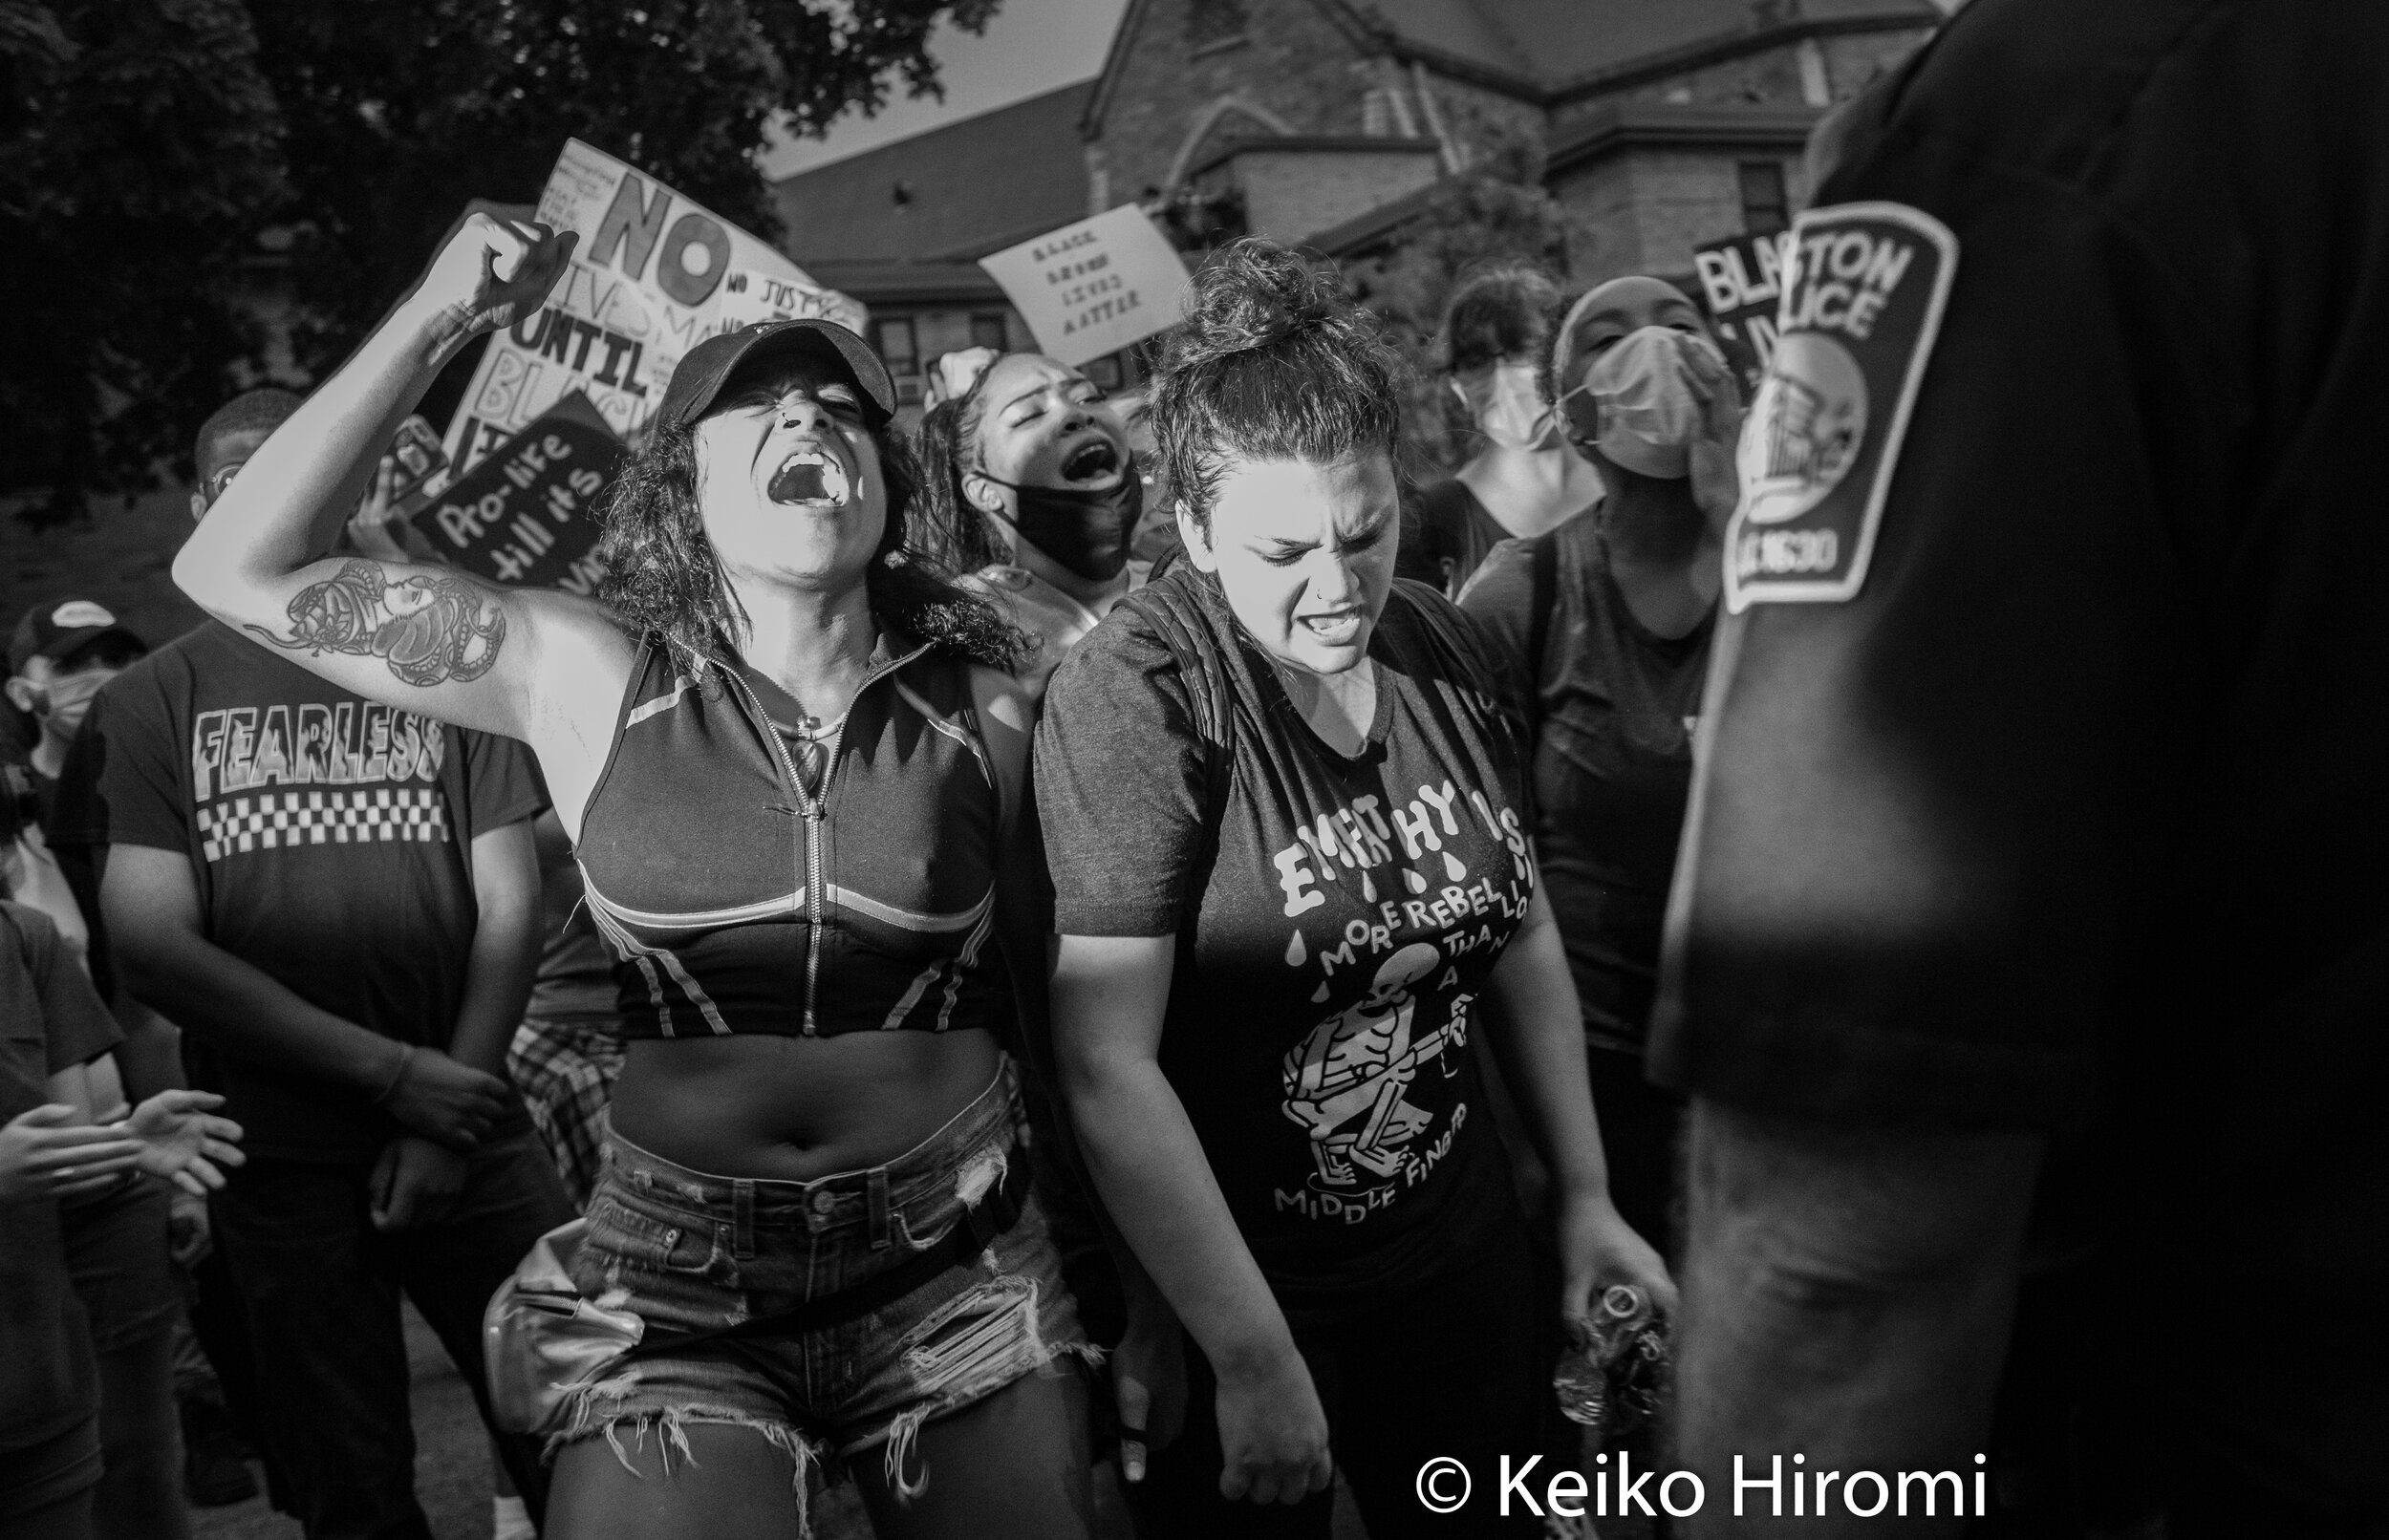  May 29, 2020, Boston, Massachusetts, USA: Demonstrators protest police and racism in front of Boston Police D-4 staion during a rally in response to deaths of George Floyd and against police brutality and racism at Peter's park in Boston, Massachuse